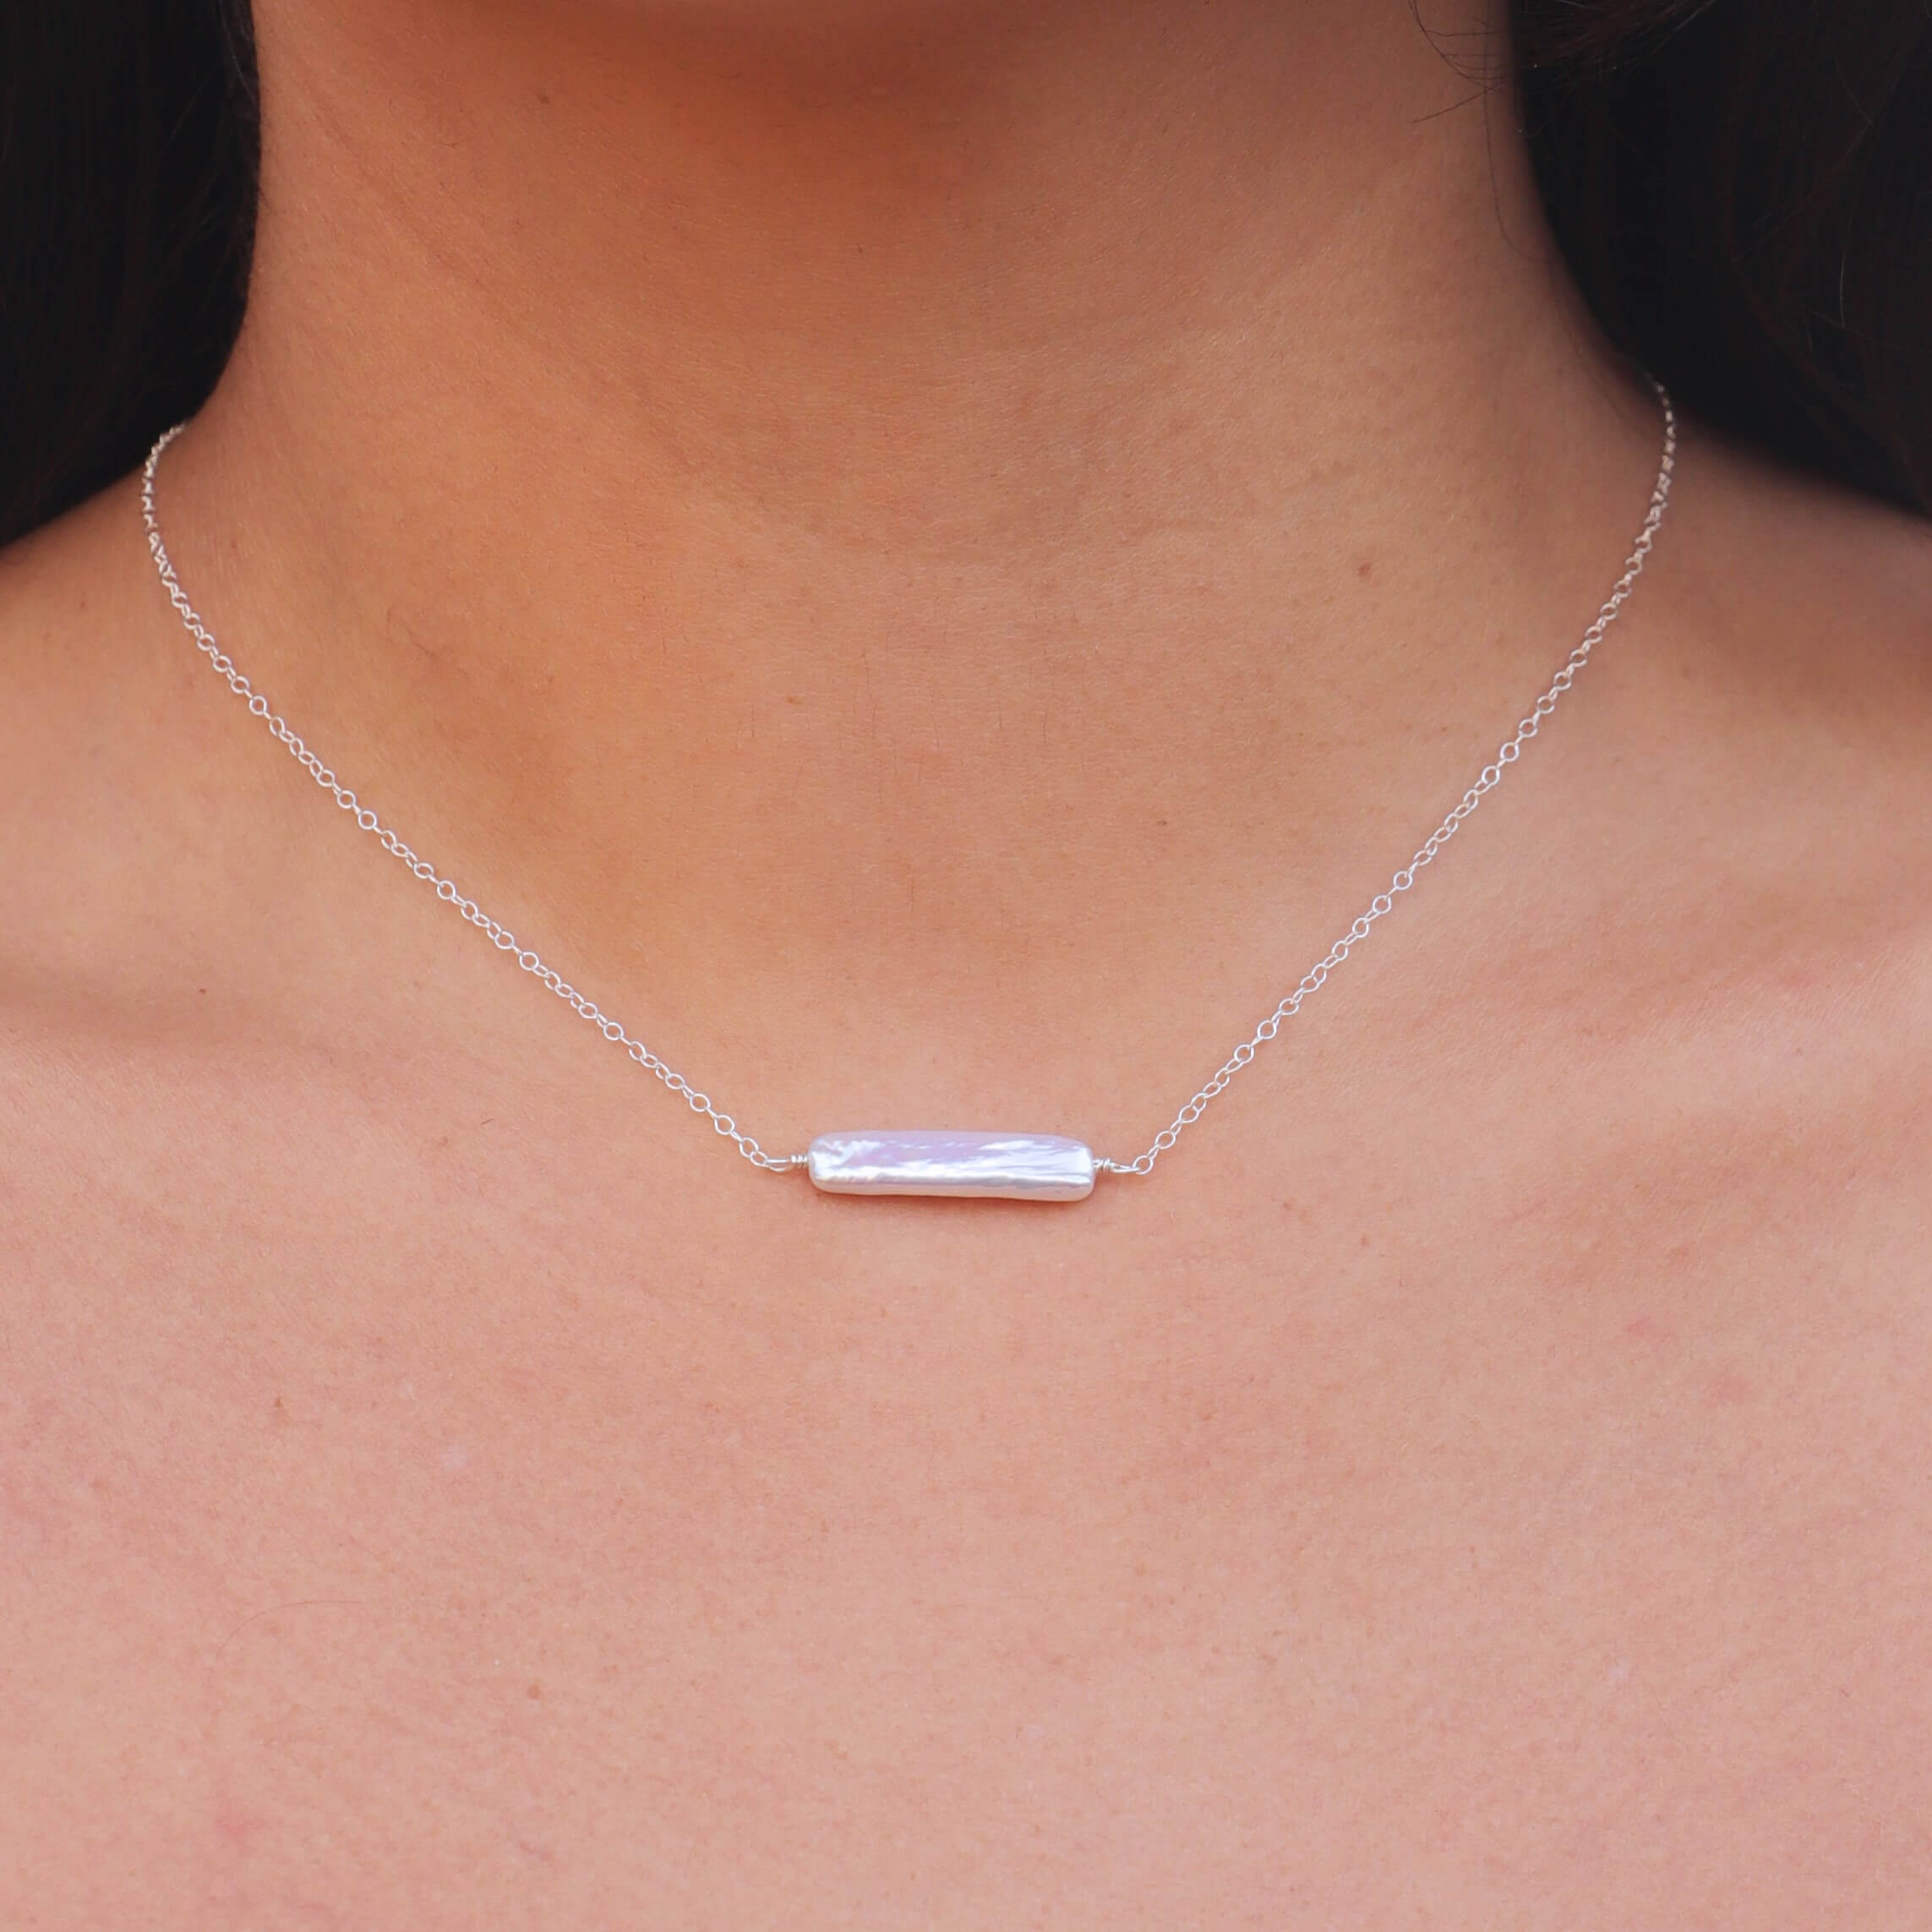 Neck of model with rectangular pearl sterling silver necklace